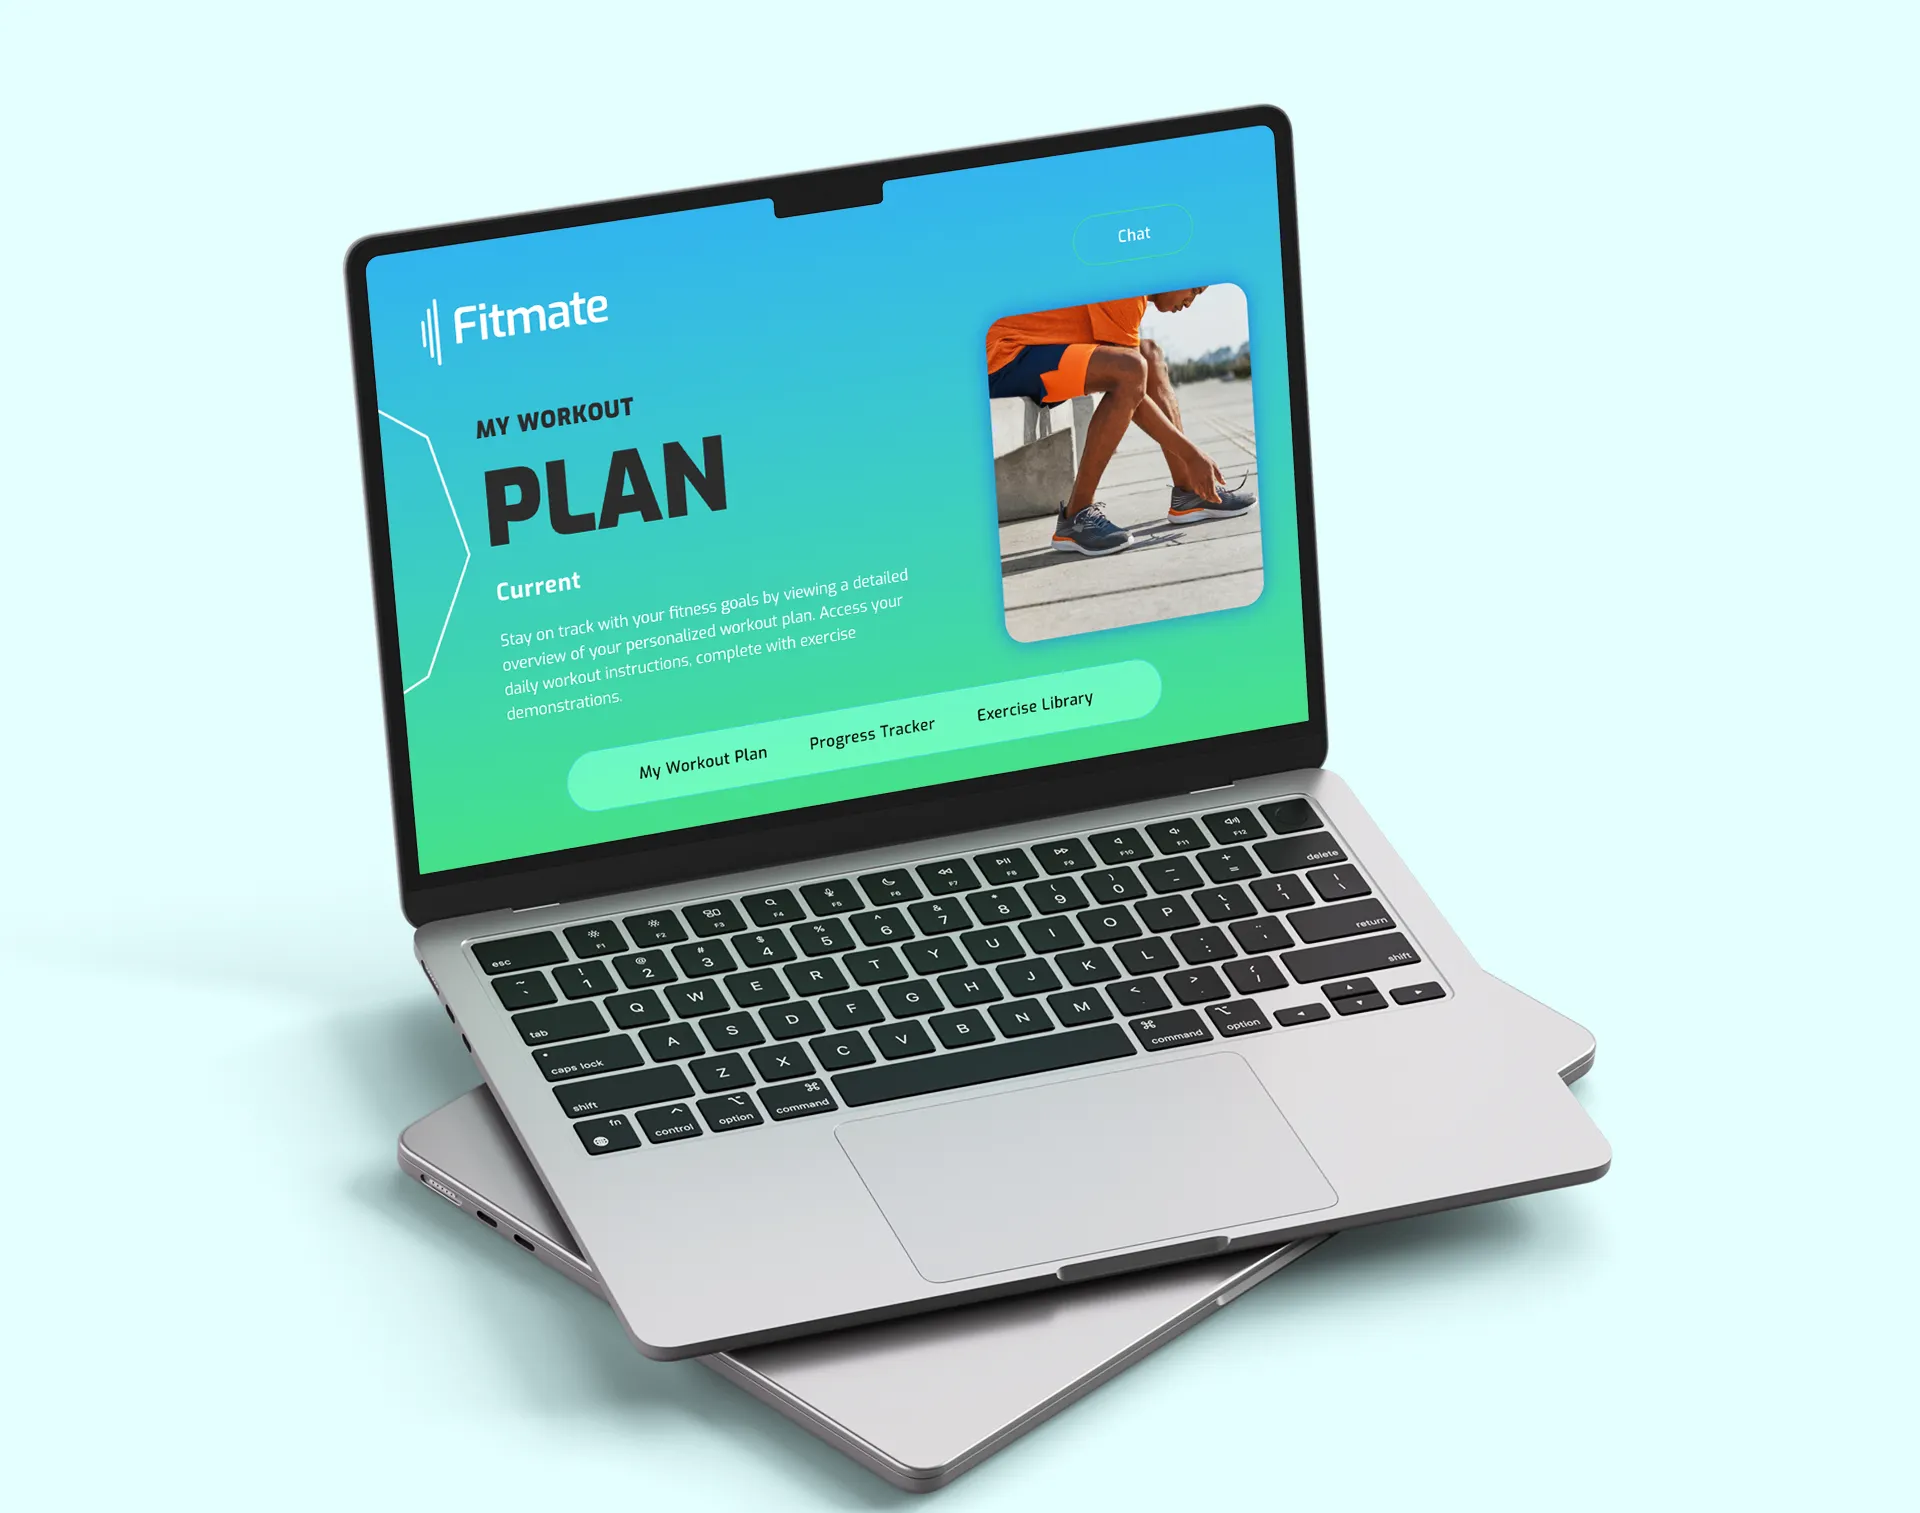 A "My Workout Plan" web UI design with slider functionality.